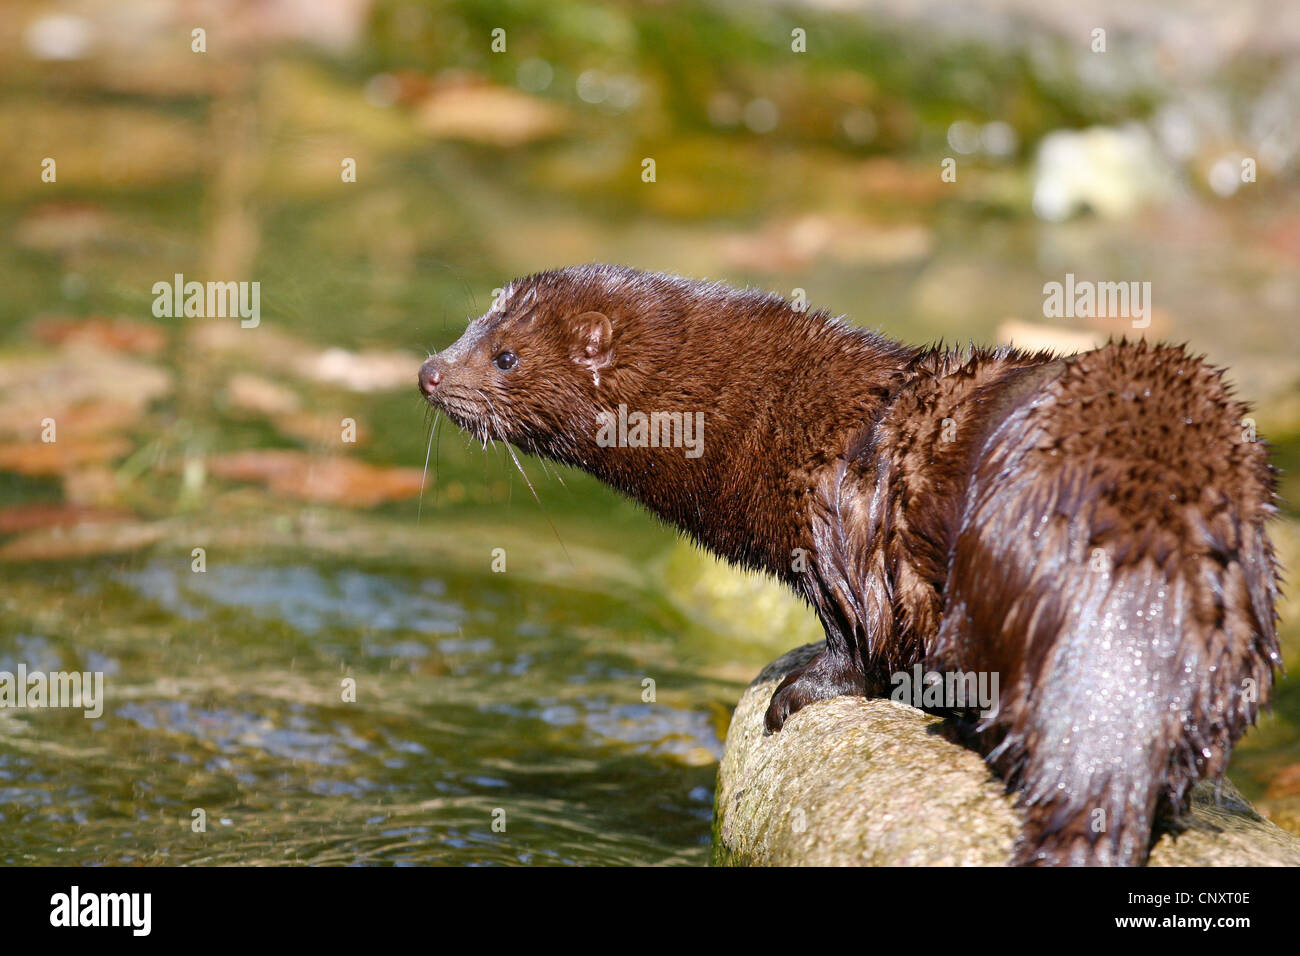 American mink (Mustela vison), sitting on a stone at a riverside, Germany Stock Photo